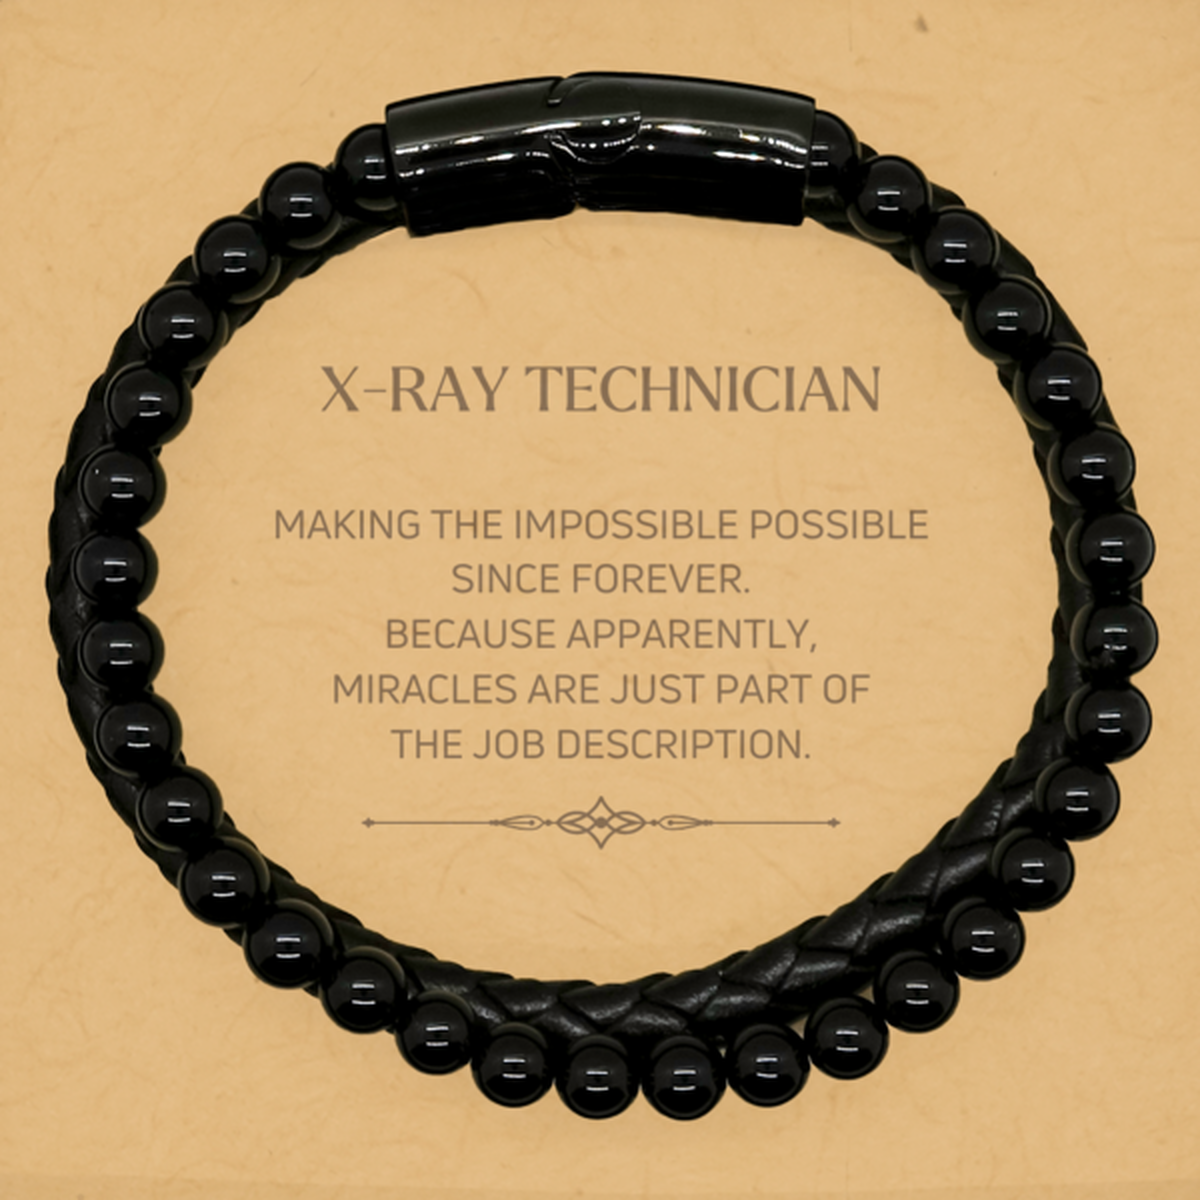 Funny X-Ray Technician Gifts, Miracles are just part of the job description, Inspirational Birthday Stone Leather Bracelets For X-Ray Technician, Men, Women, Coworkers, Friends, Boss